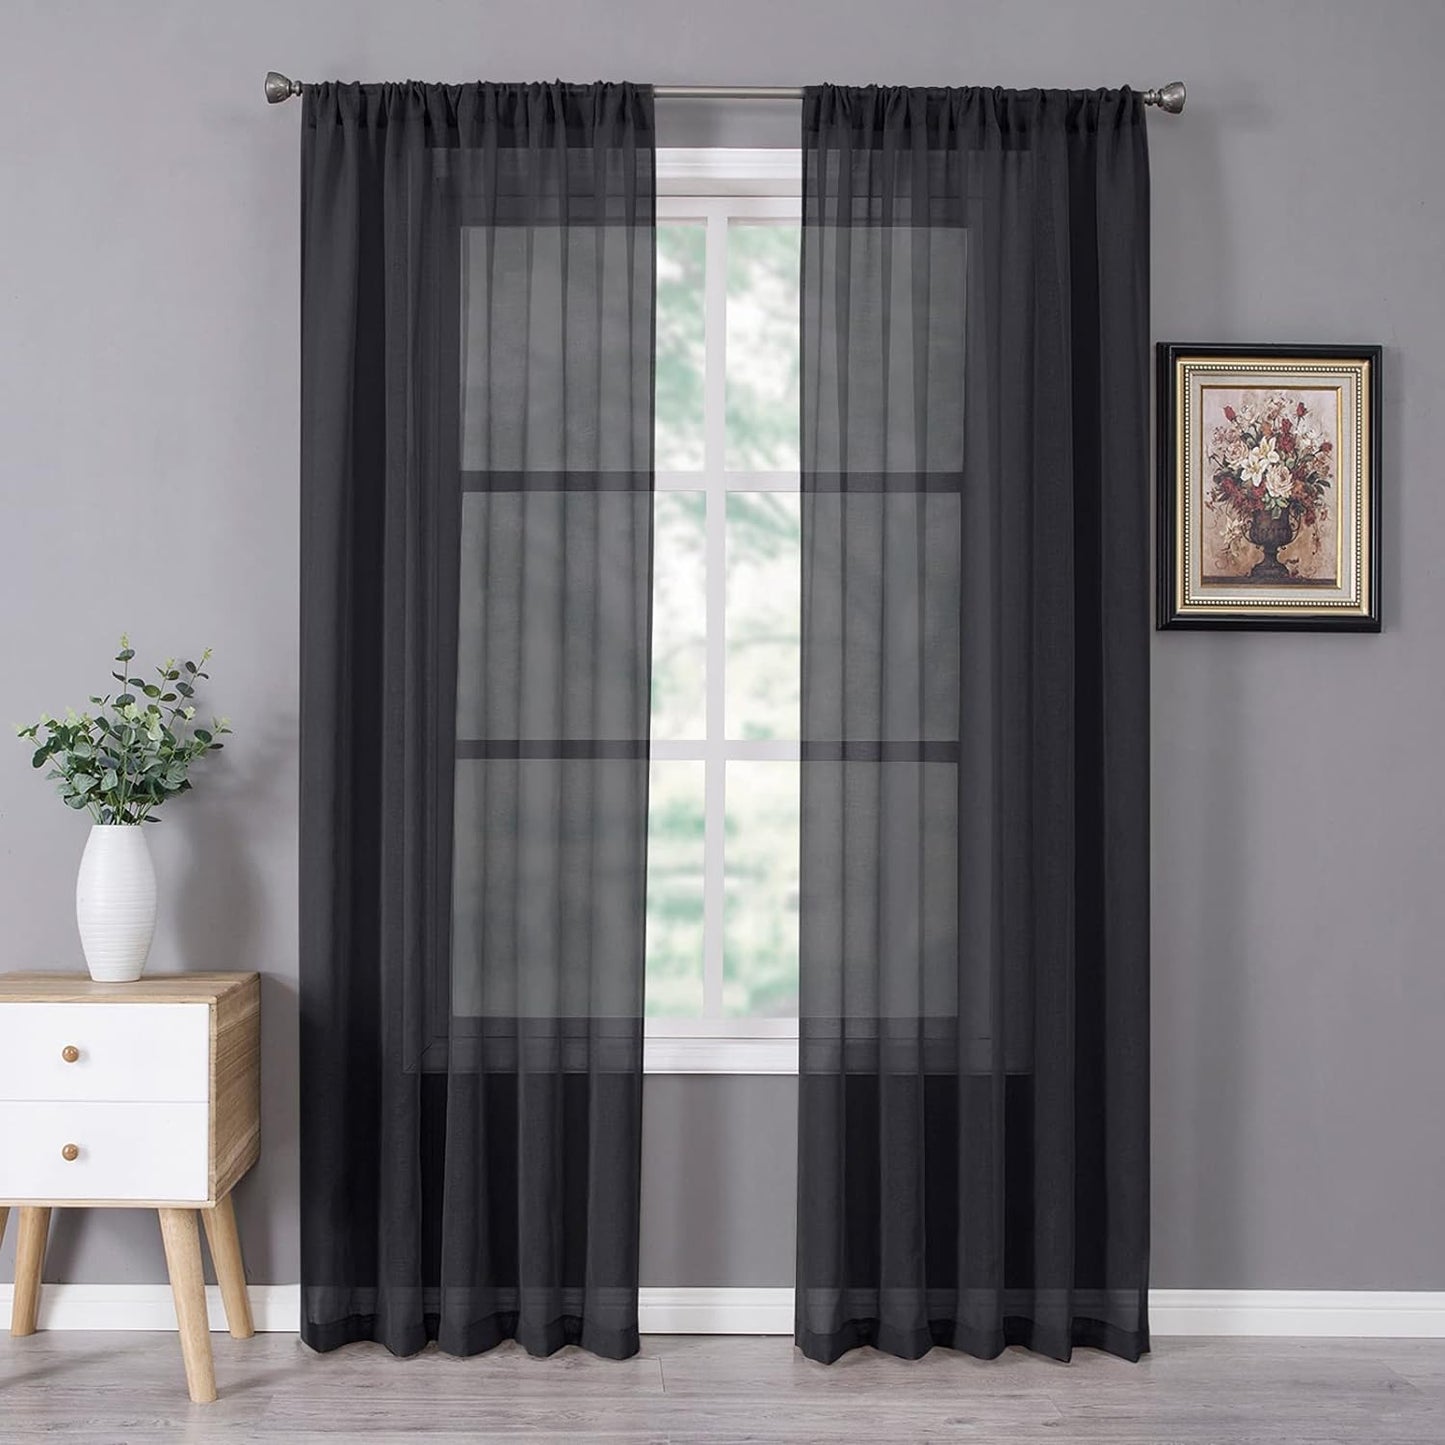 Tollpiz Short Sheer Curtains Linen Textured Bedroom Curtain Sheers Light Filtering Rod Pocket Voile Curtains for Living Room, 54 X 45 Inches Long, White, Set of 2 Panels  Tollpiz Tex Black 54"W X 72"L 